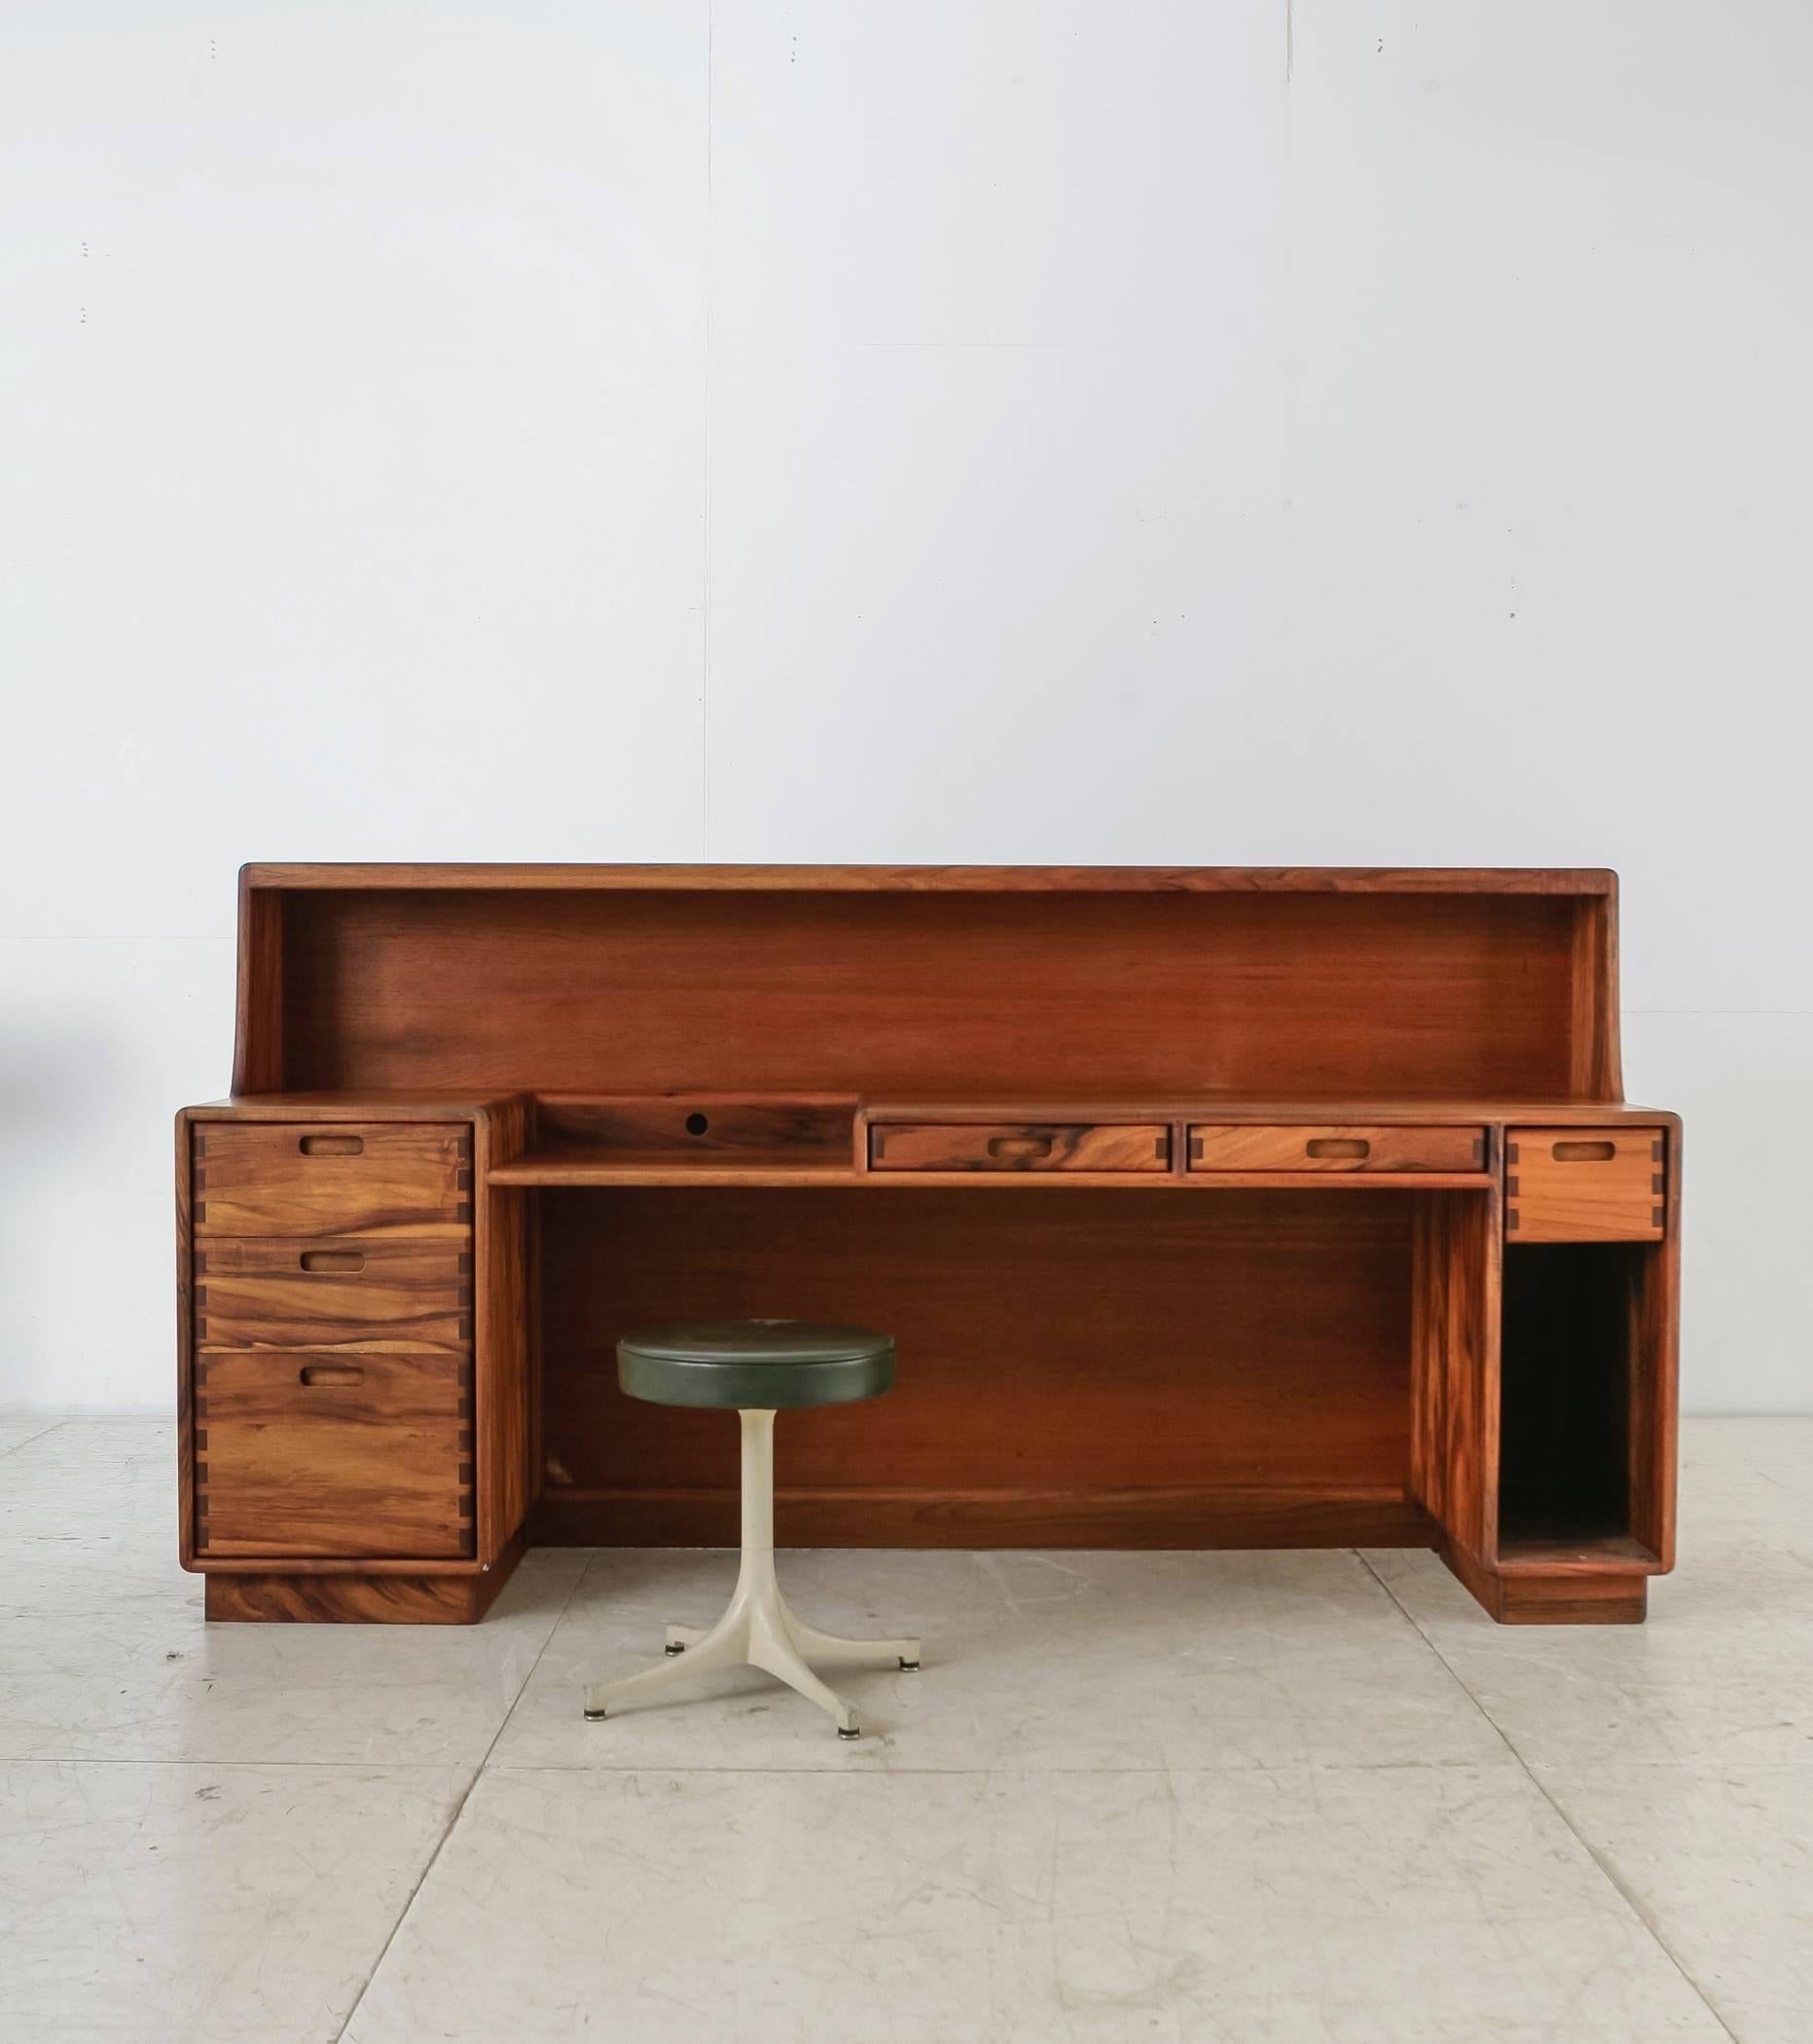 A large working desk with six drawers by California craftsman Jim Sweeney. The total height is 109.5 cm (43